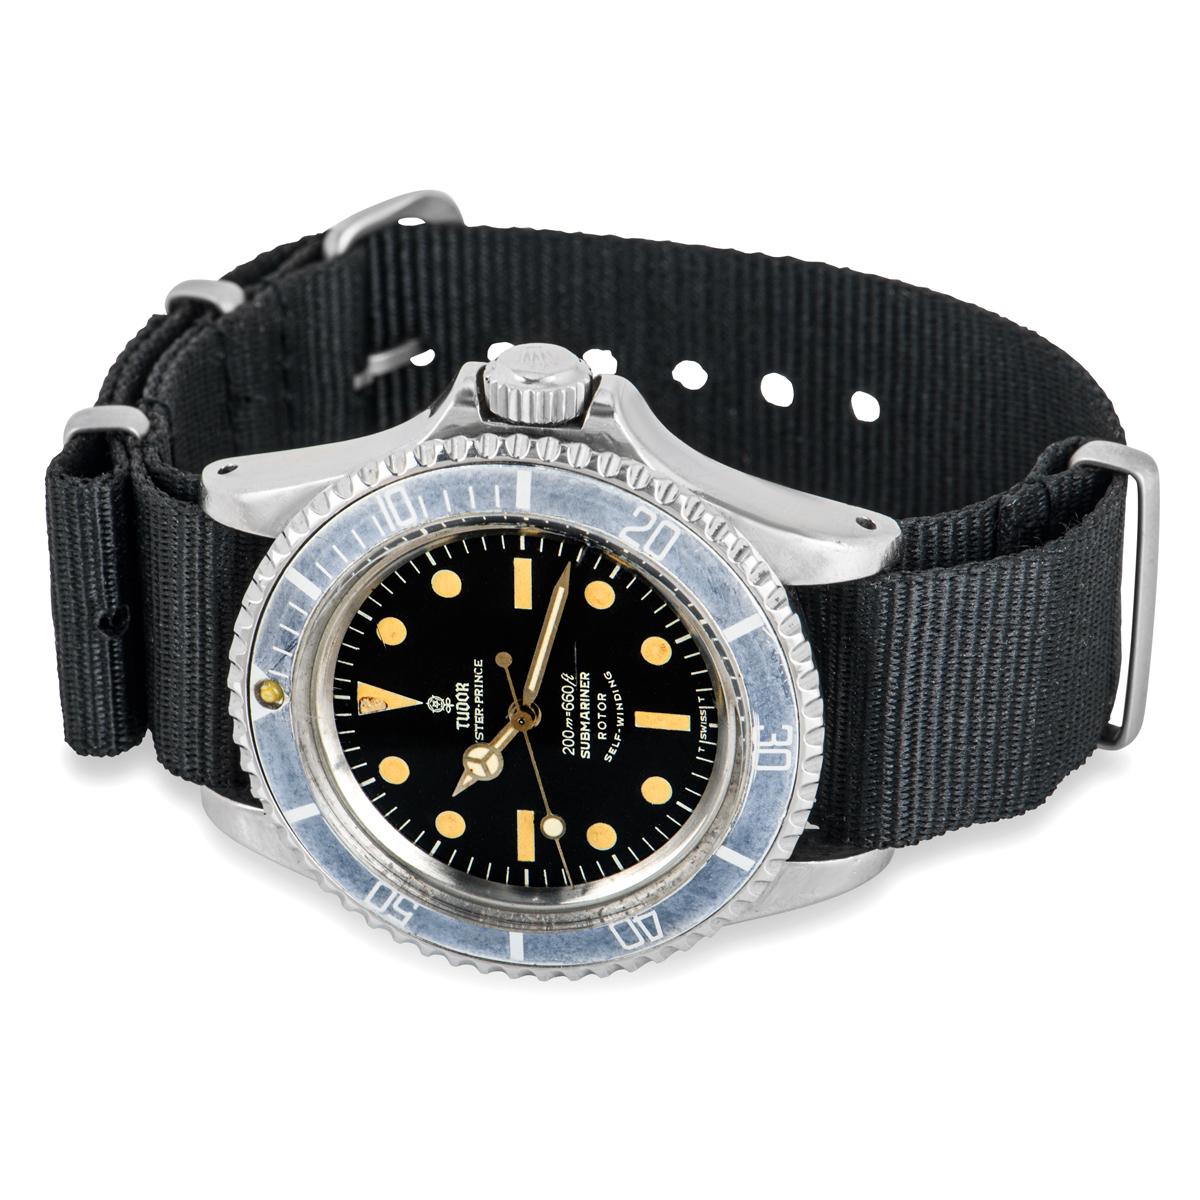 Tudor Vintage Submariner 7928 Watch In Excellent Condition For Sale In London, GB